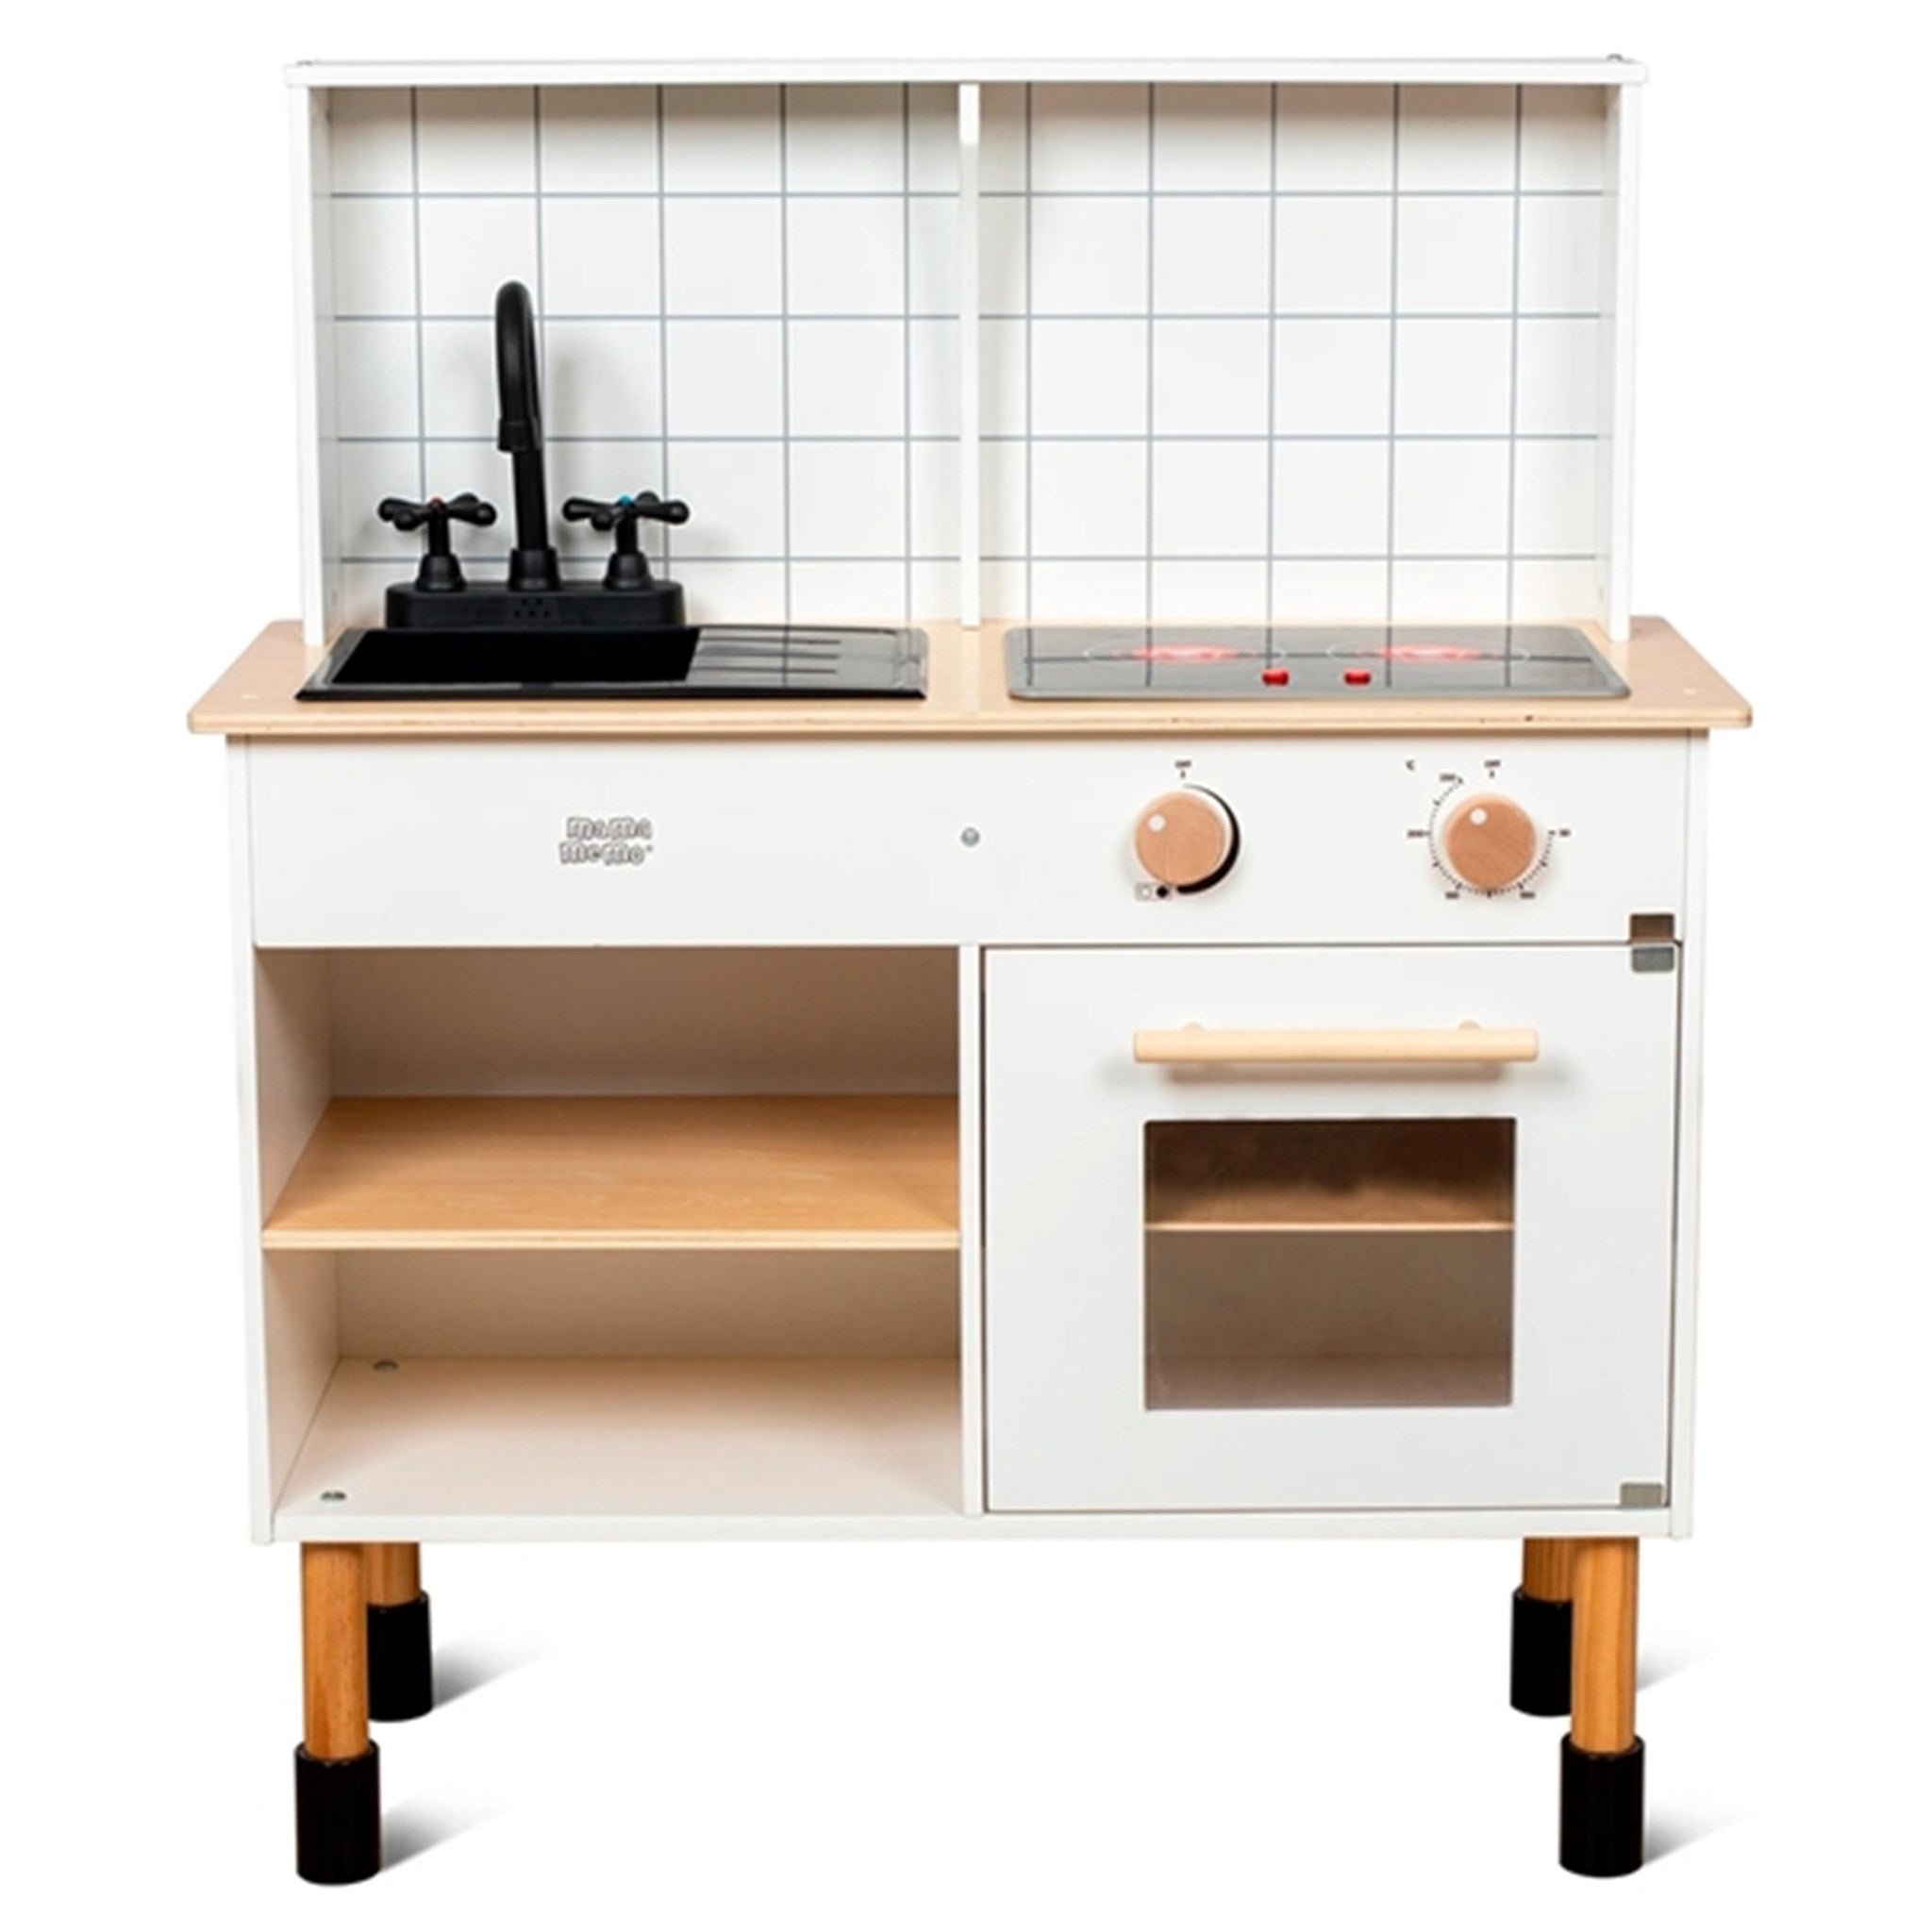 MaMaMeMo Play Kitchen with Electric Hob